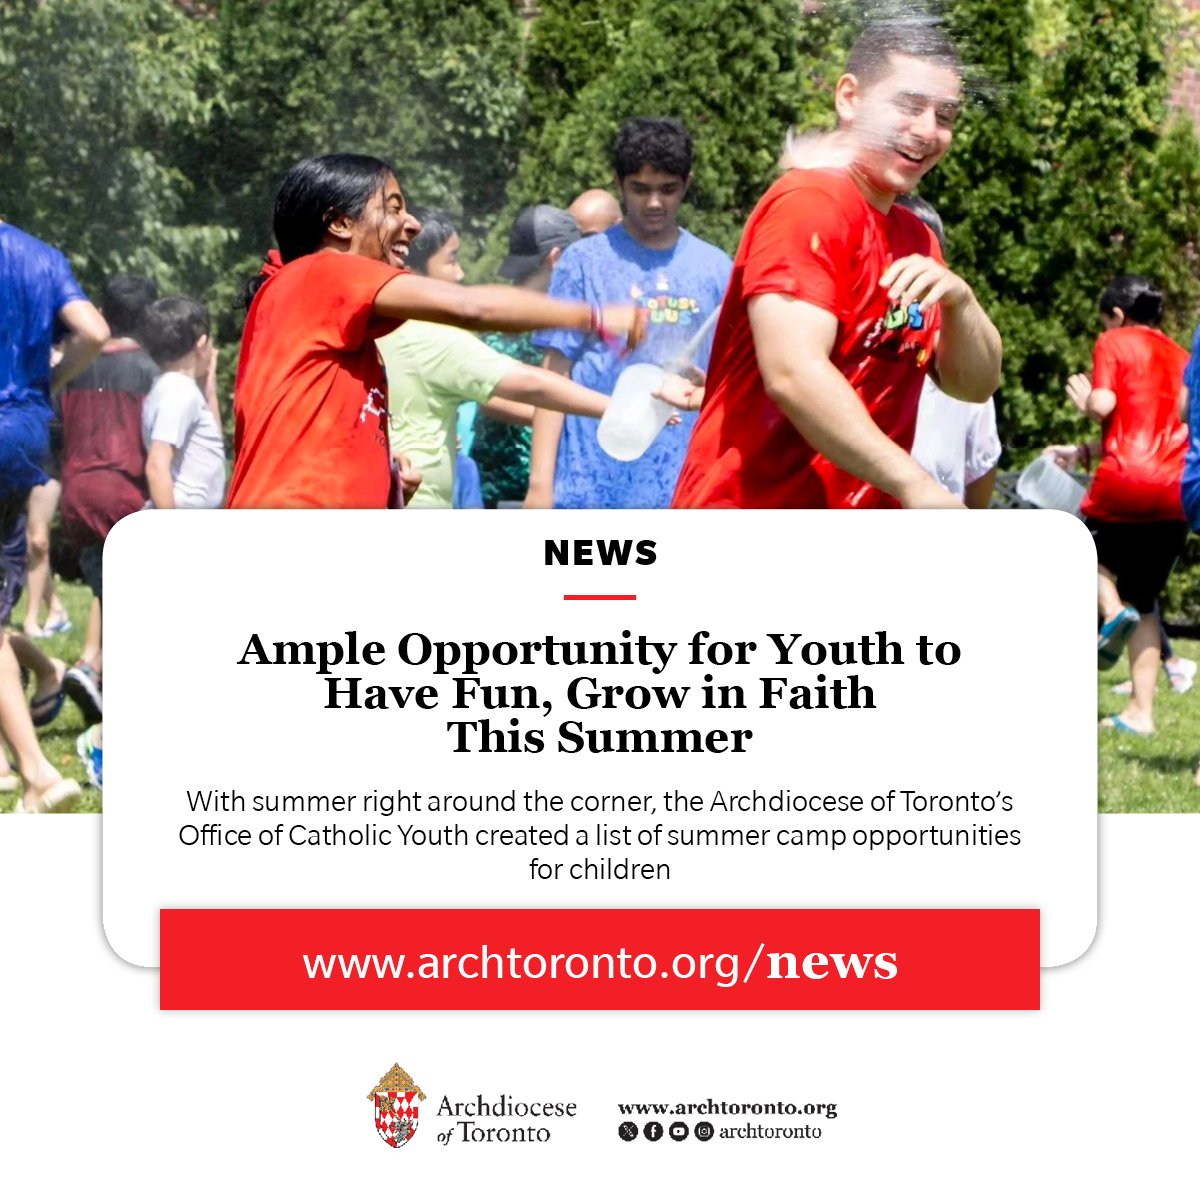 NEWS: Ample Opportunity for Youth to Have Fun, Grow in Faith This Summer bit.ly/news-OCYSummer #catholicTO